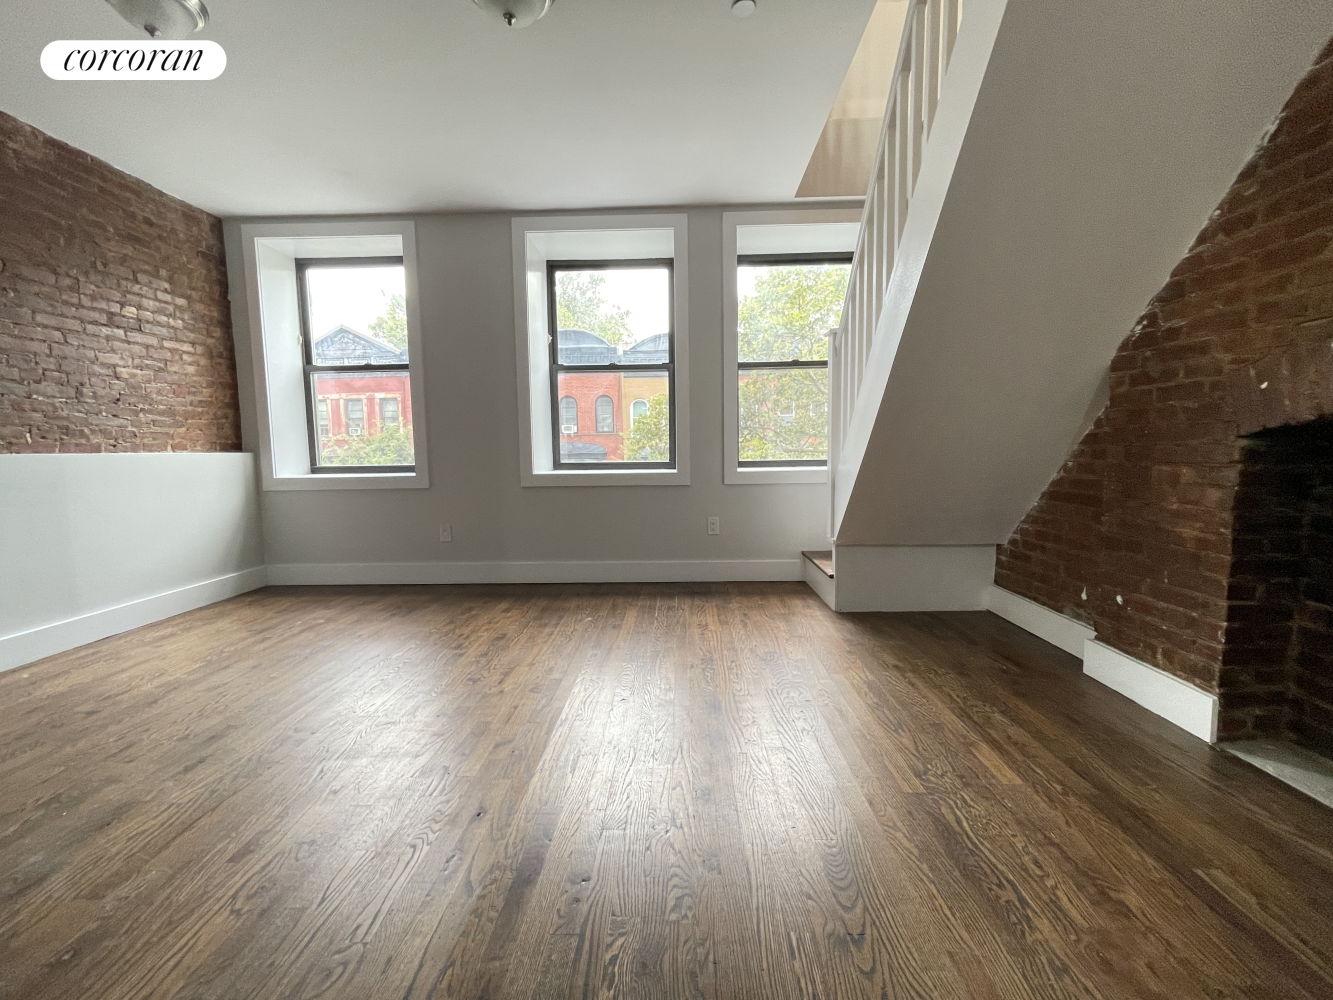 229 West 136th Street Ph4f, Central Harlem, Upper Manhattan, NYC - 1 Bedrooms  
1 Bathrooms  
3 Rooms - 